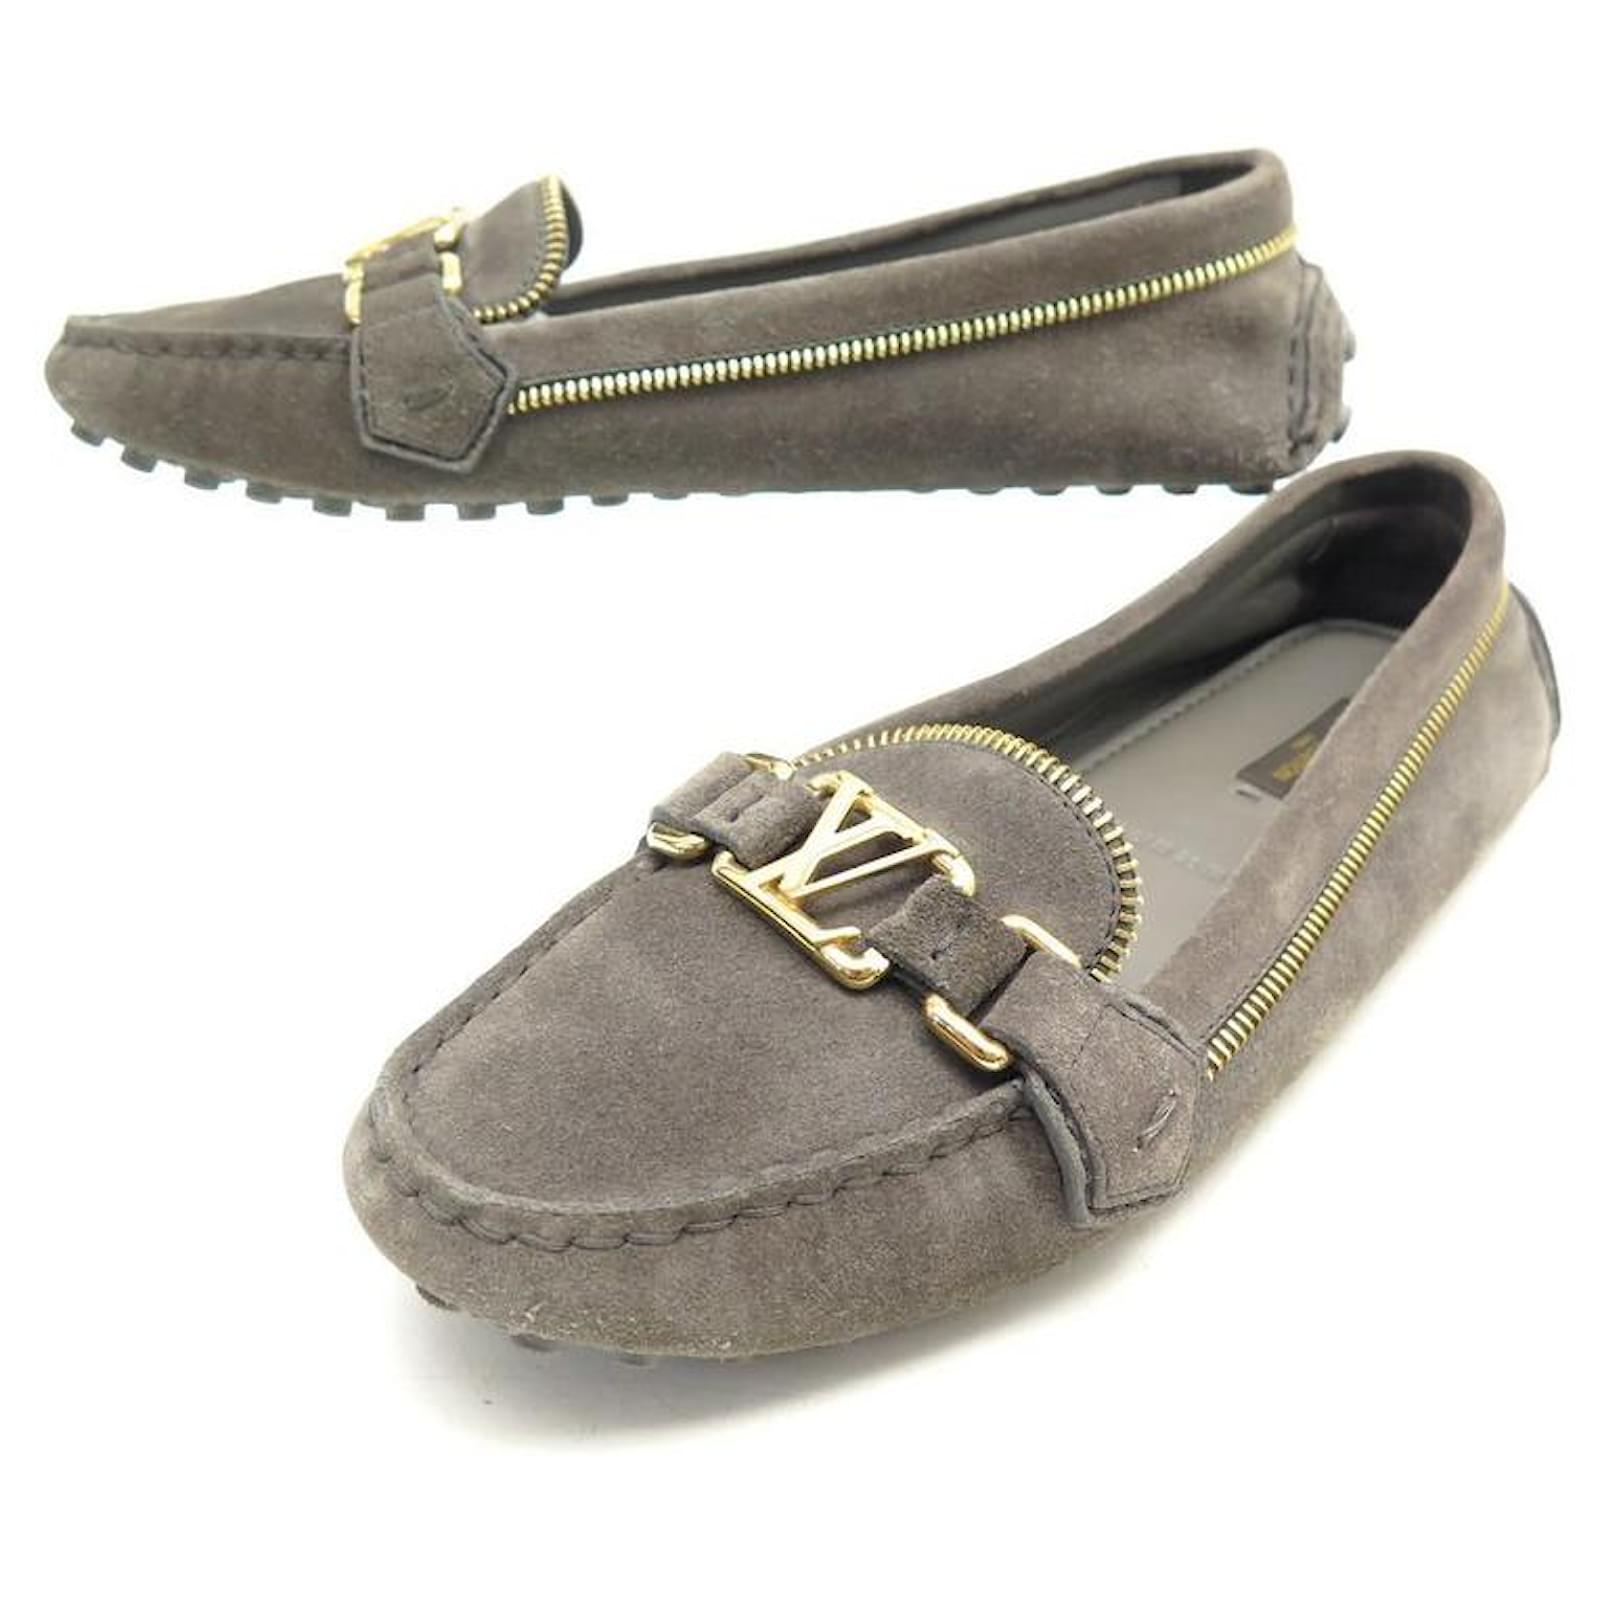 LOUIS VUITTON SHOES OXFORD MOCCASIN 38.5 TAUPE SUEDE SUEDE SHOES